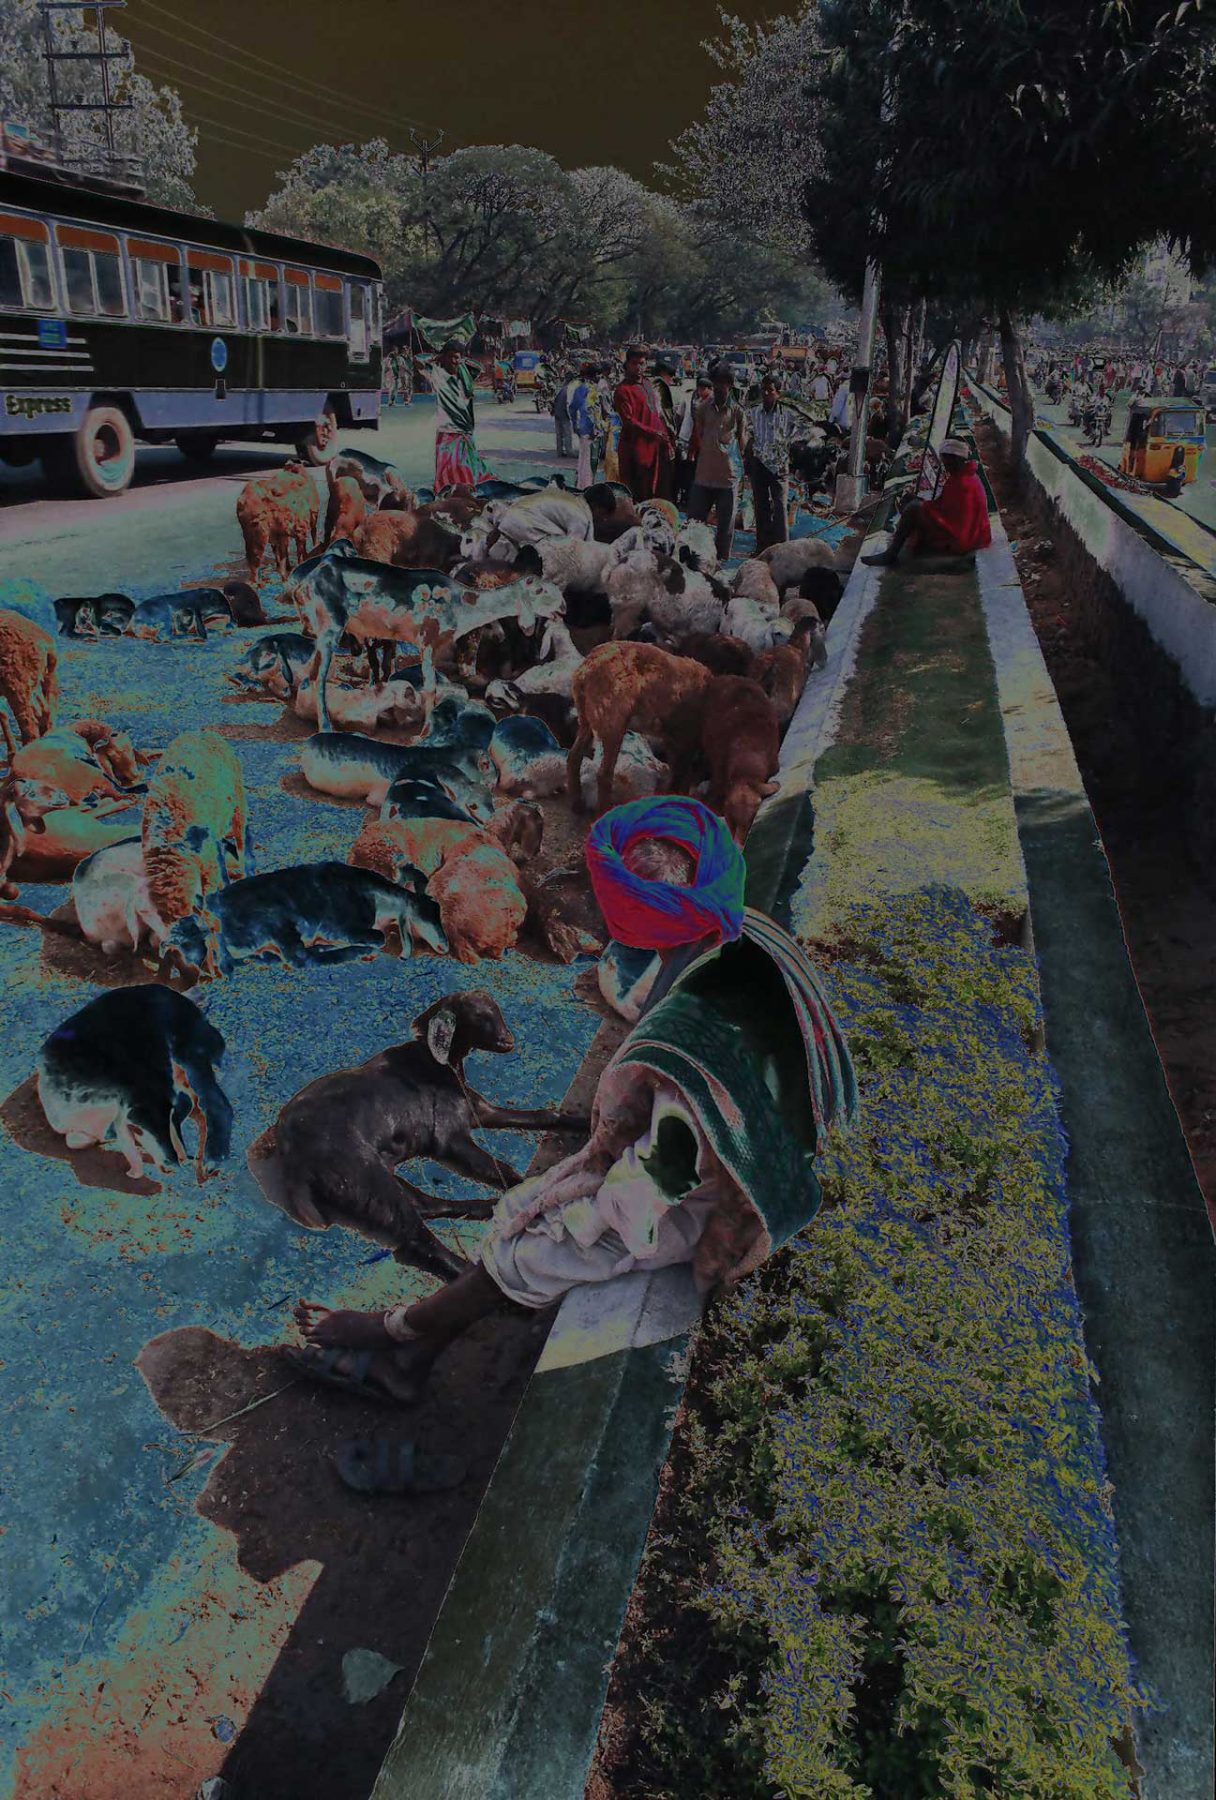 Flood in the Sky (Goats with Turban) (2005) photographic mixed media, 0.60H x 0.91W meters